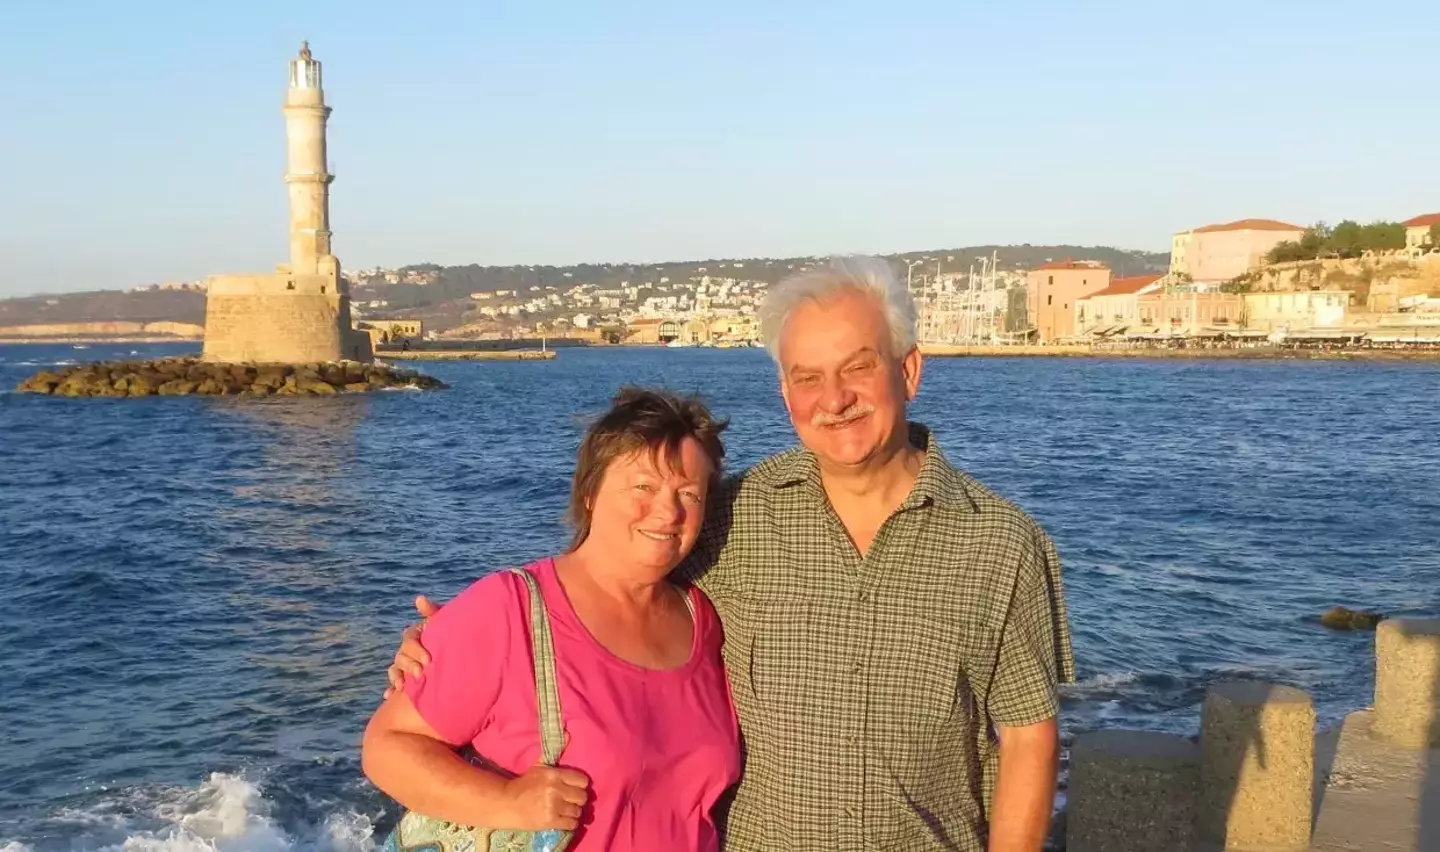 Heide and David were on holiday together.